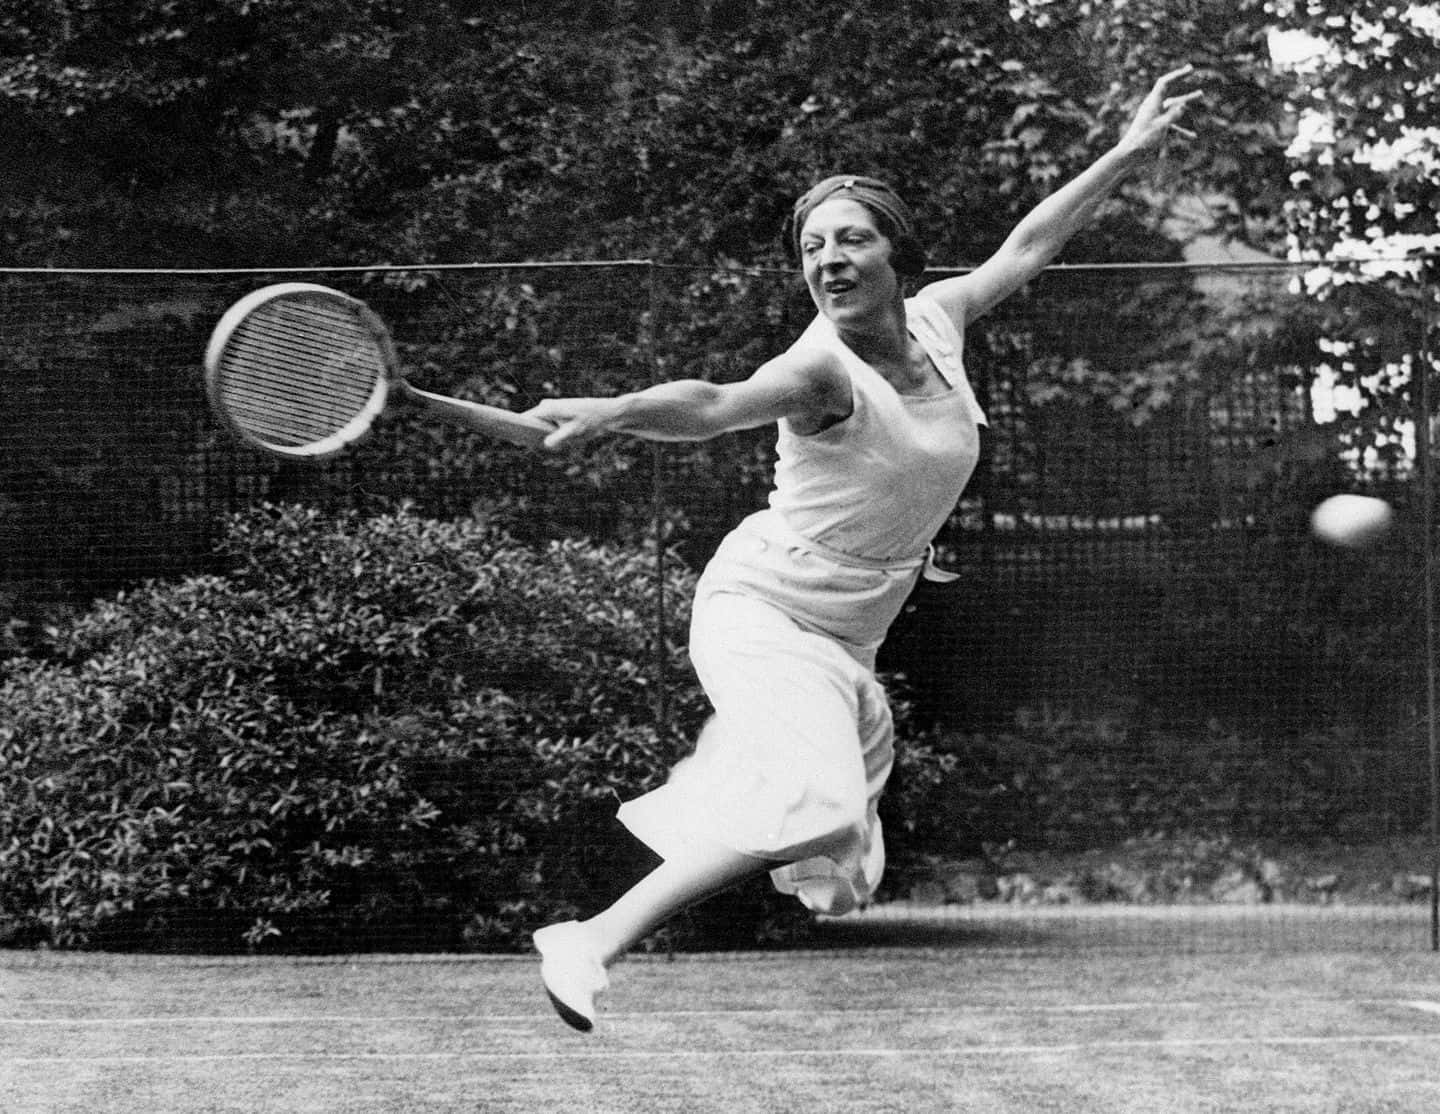 Caption: Suzanne Lenglen in action with a classic backhand stance Wallpaper